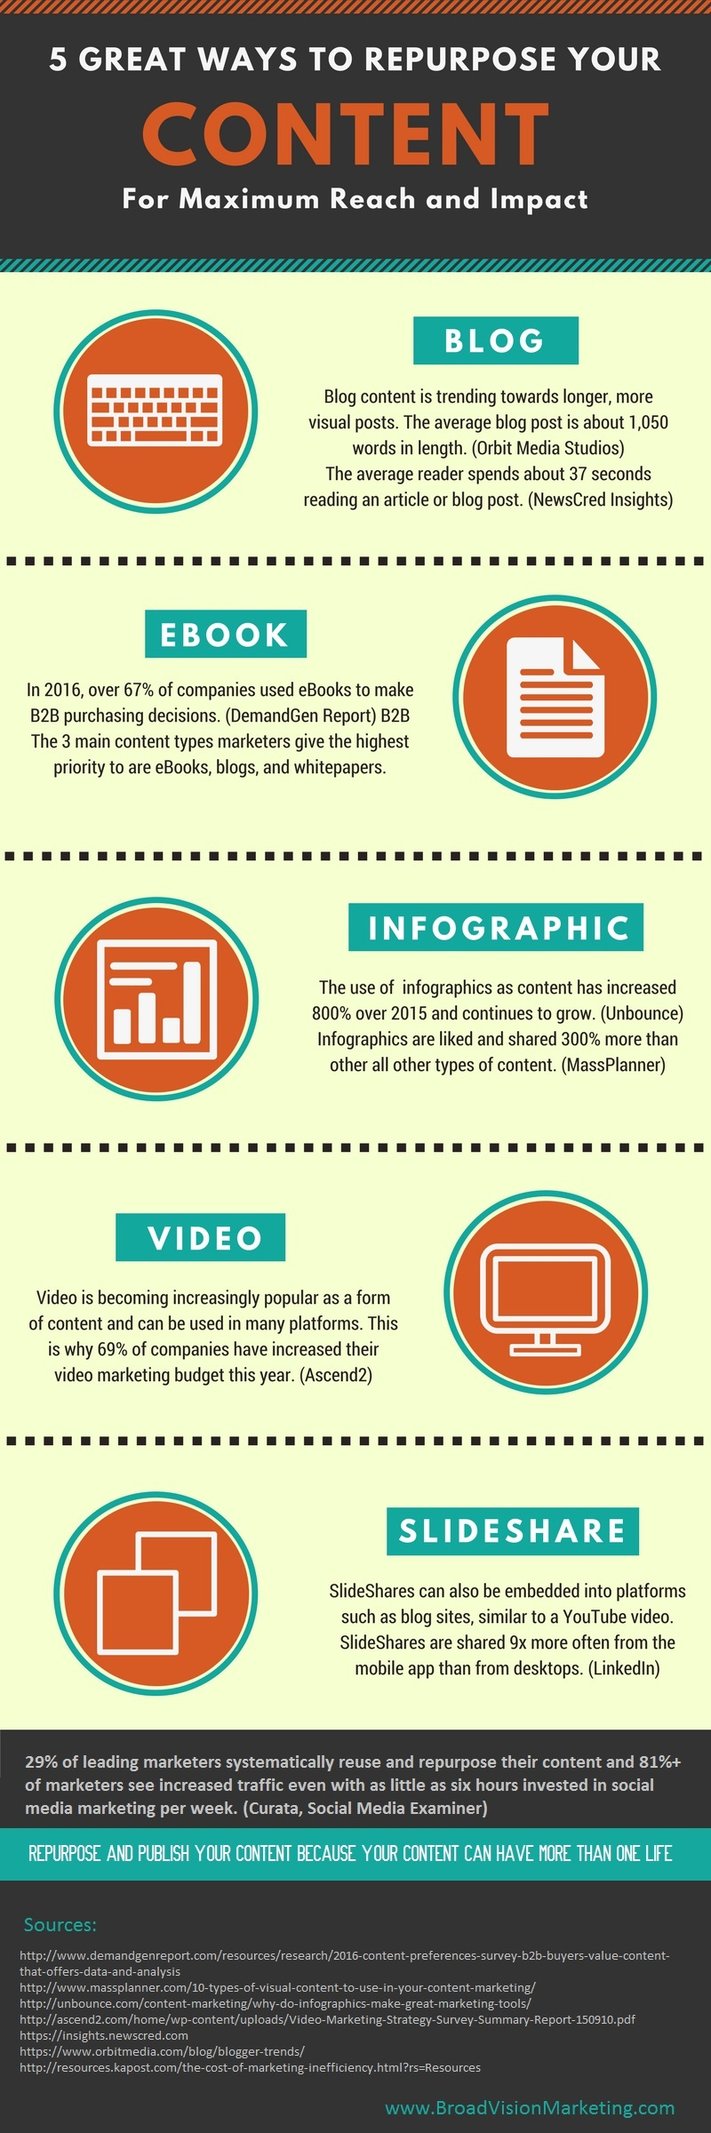 your-content-has-more-than-one-life-repurposing-content-infographic